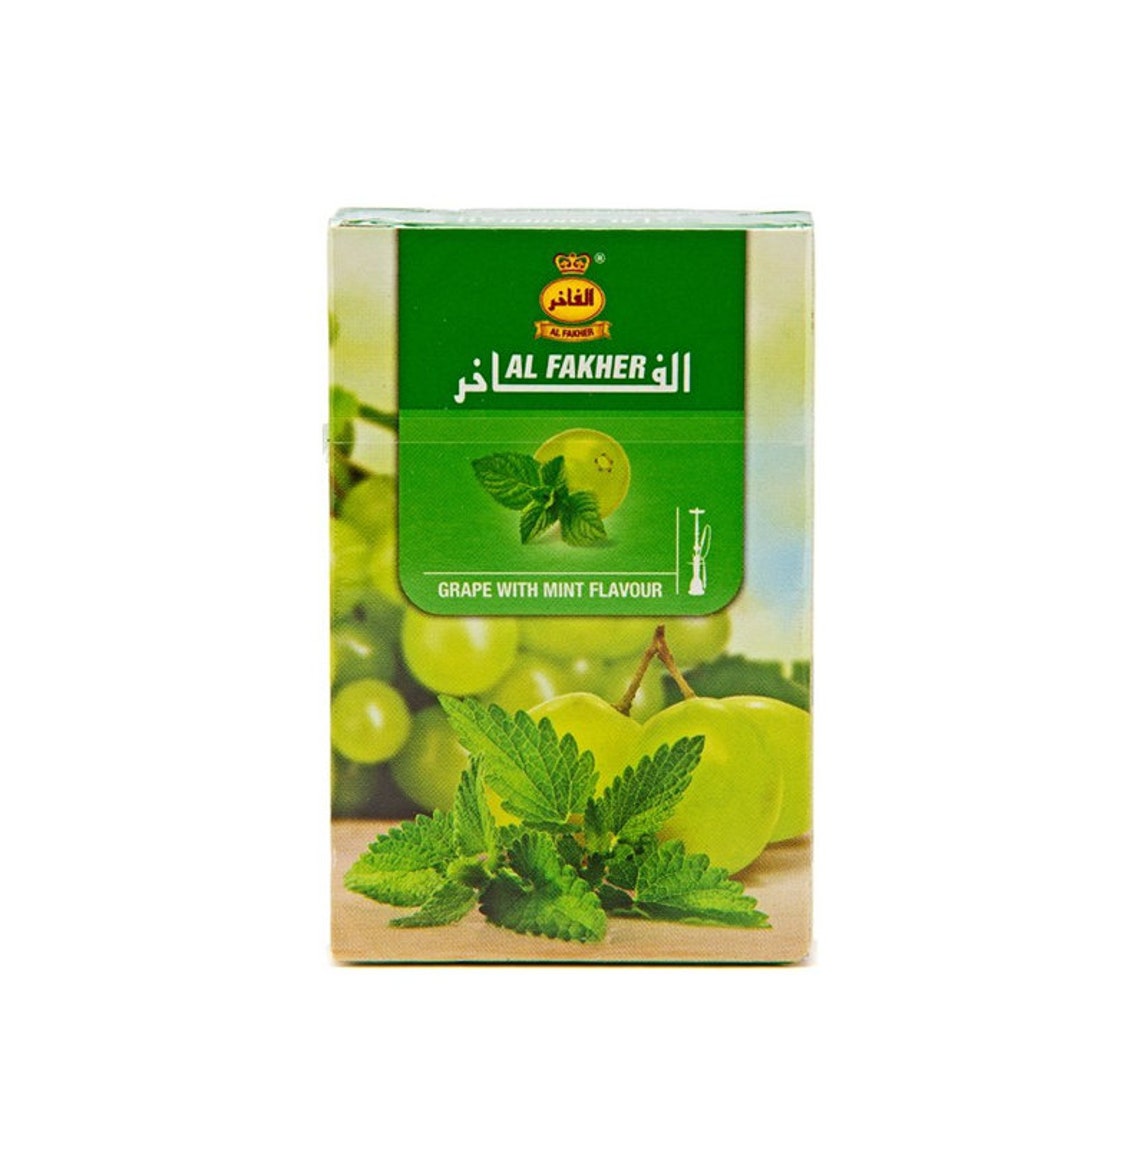 Al-Fakher Grape mint flavour pack for 50 gms made by | Etsy